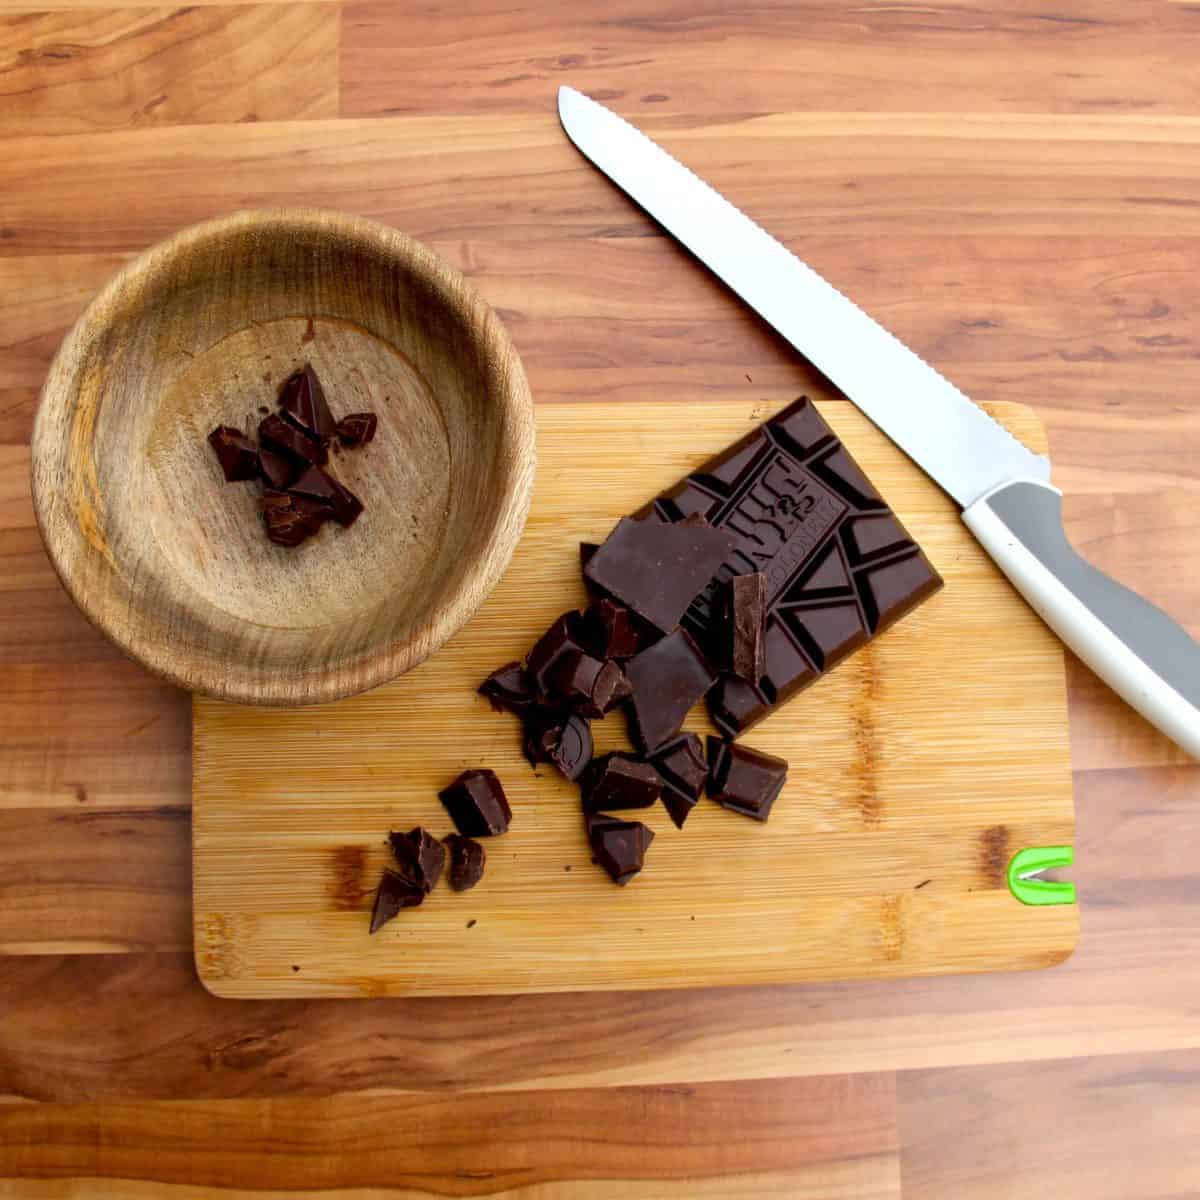 Chopping the chocolate